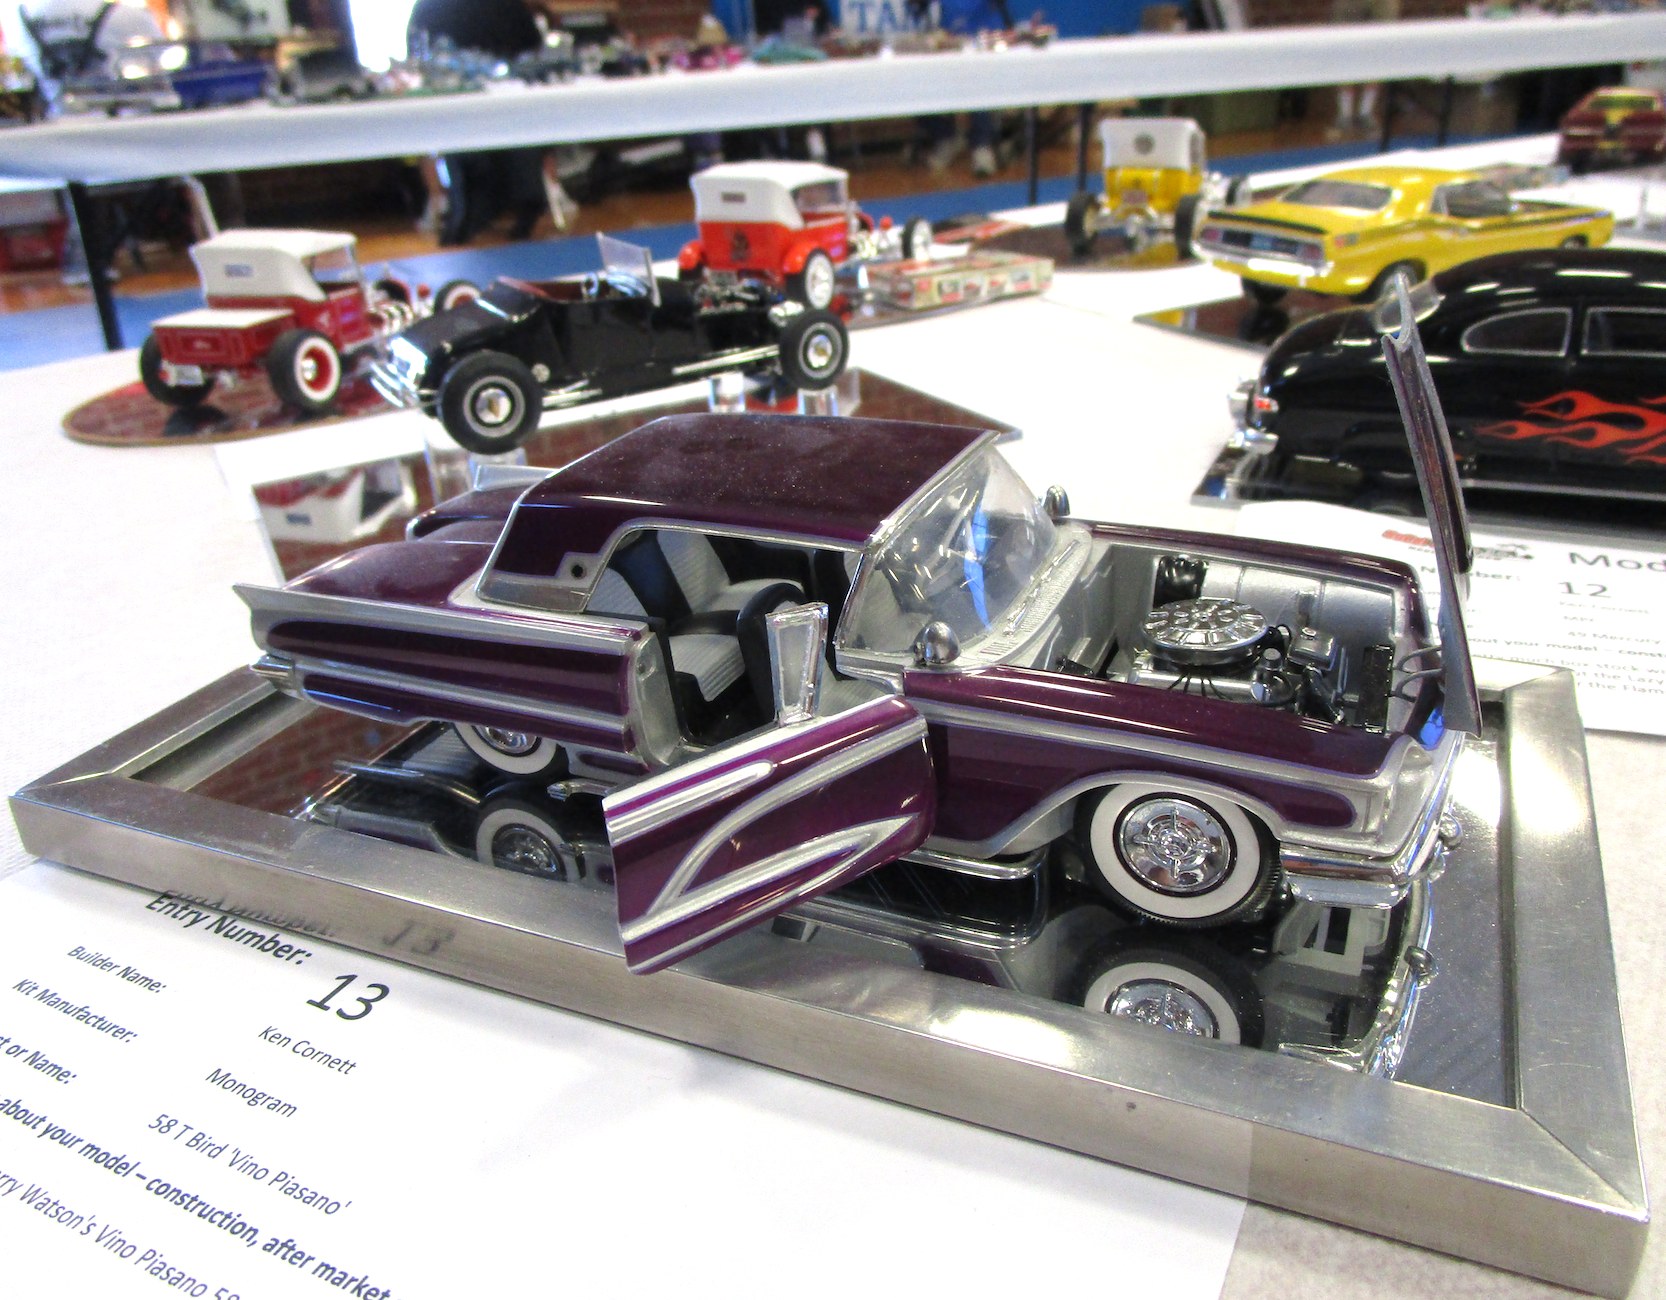 SoCal Open 2021 Model Car Show California - Pictures - Events